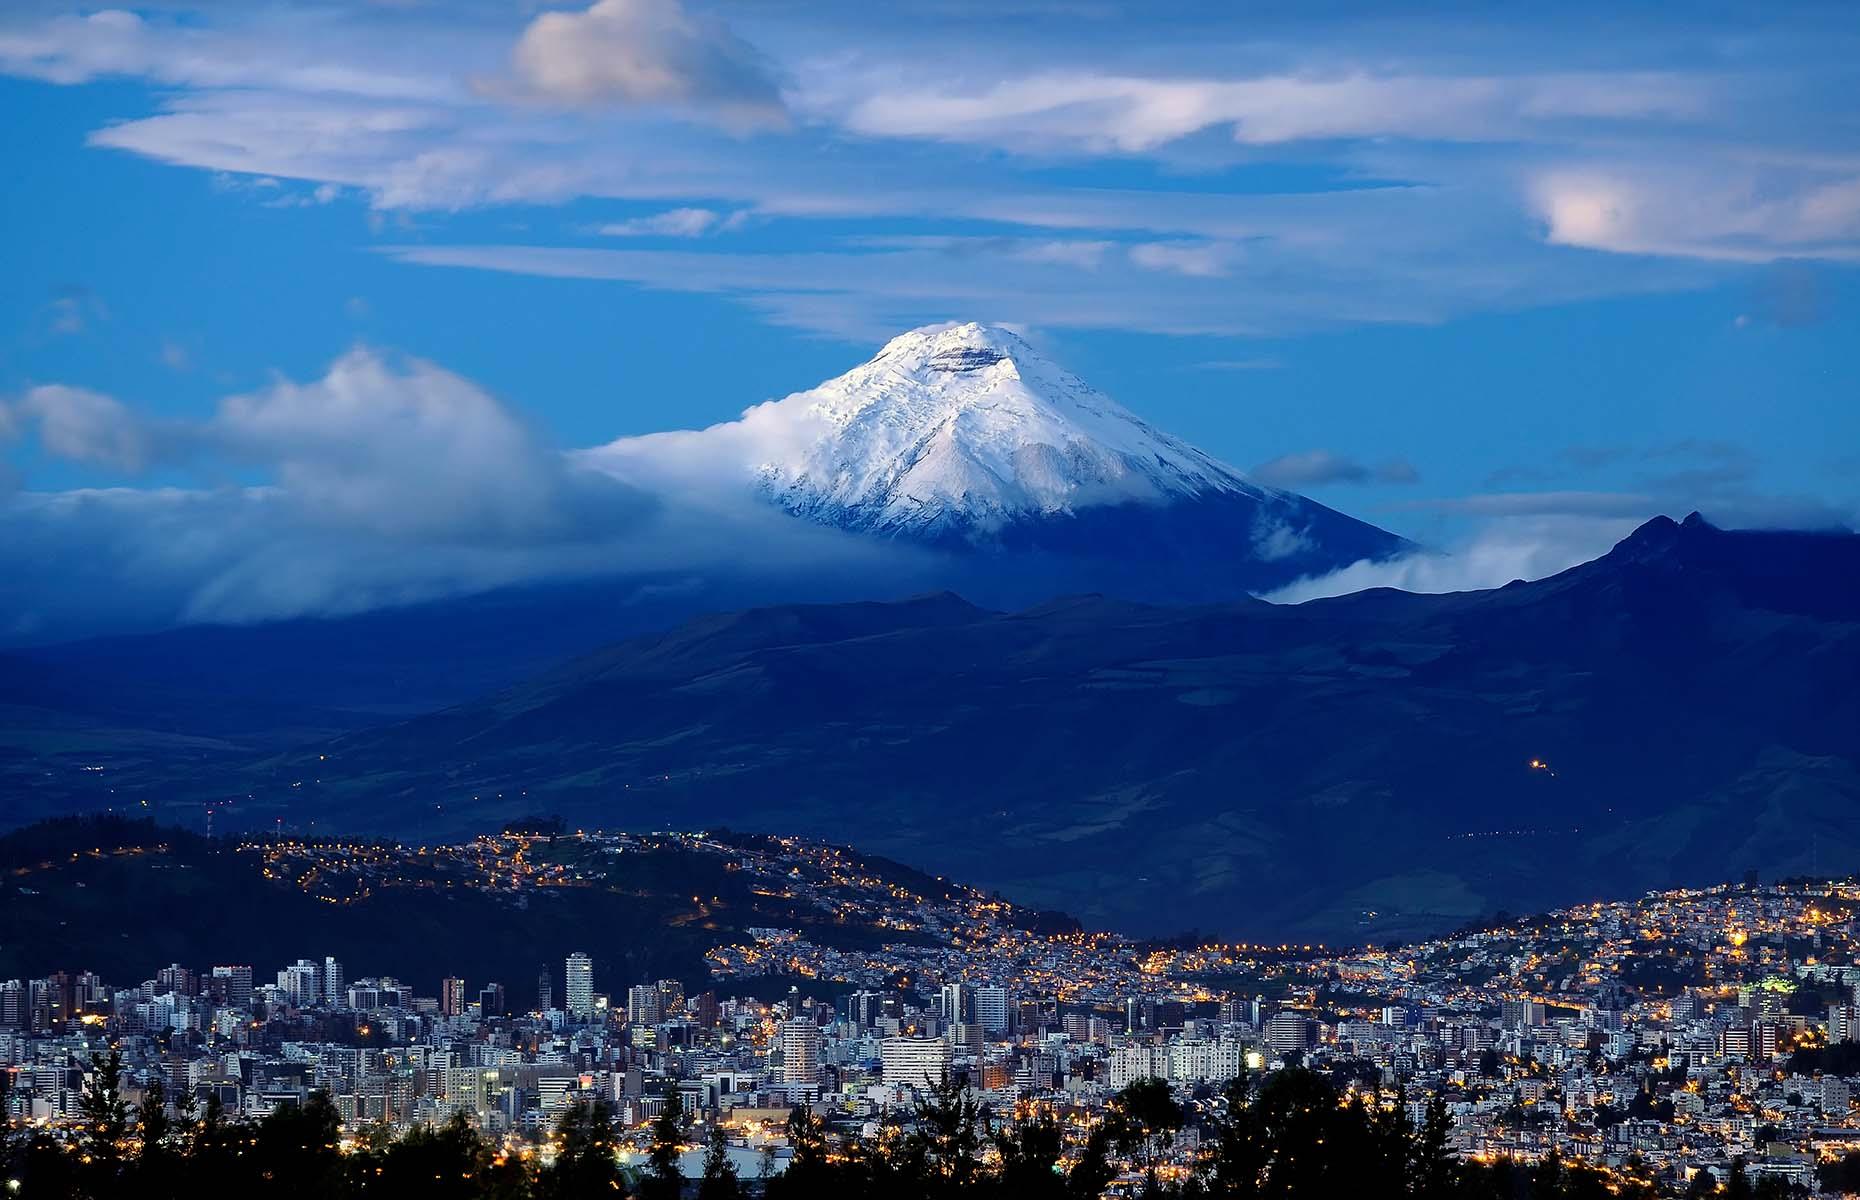 Cotopaxi is among some one of the world’s highest volcanoes, reaching a height of 19,347 feet (5,897m) so any ascent requires mountaineering equipment suitable for a glacier climb as well as plenty of time to acclimatize. The summit reopened to climbers in 2017 after a major eruption two years earlier, but new travel restrictions are now in place due to the COVID-19 pandemic.